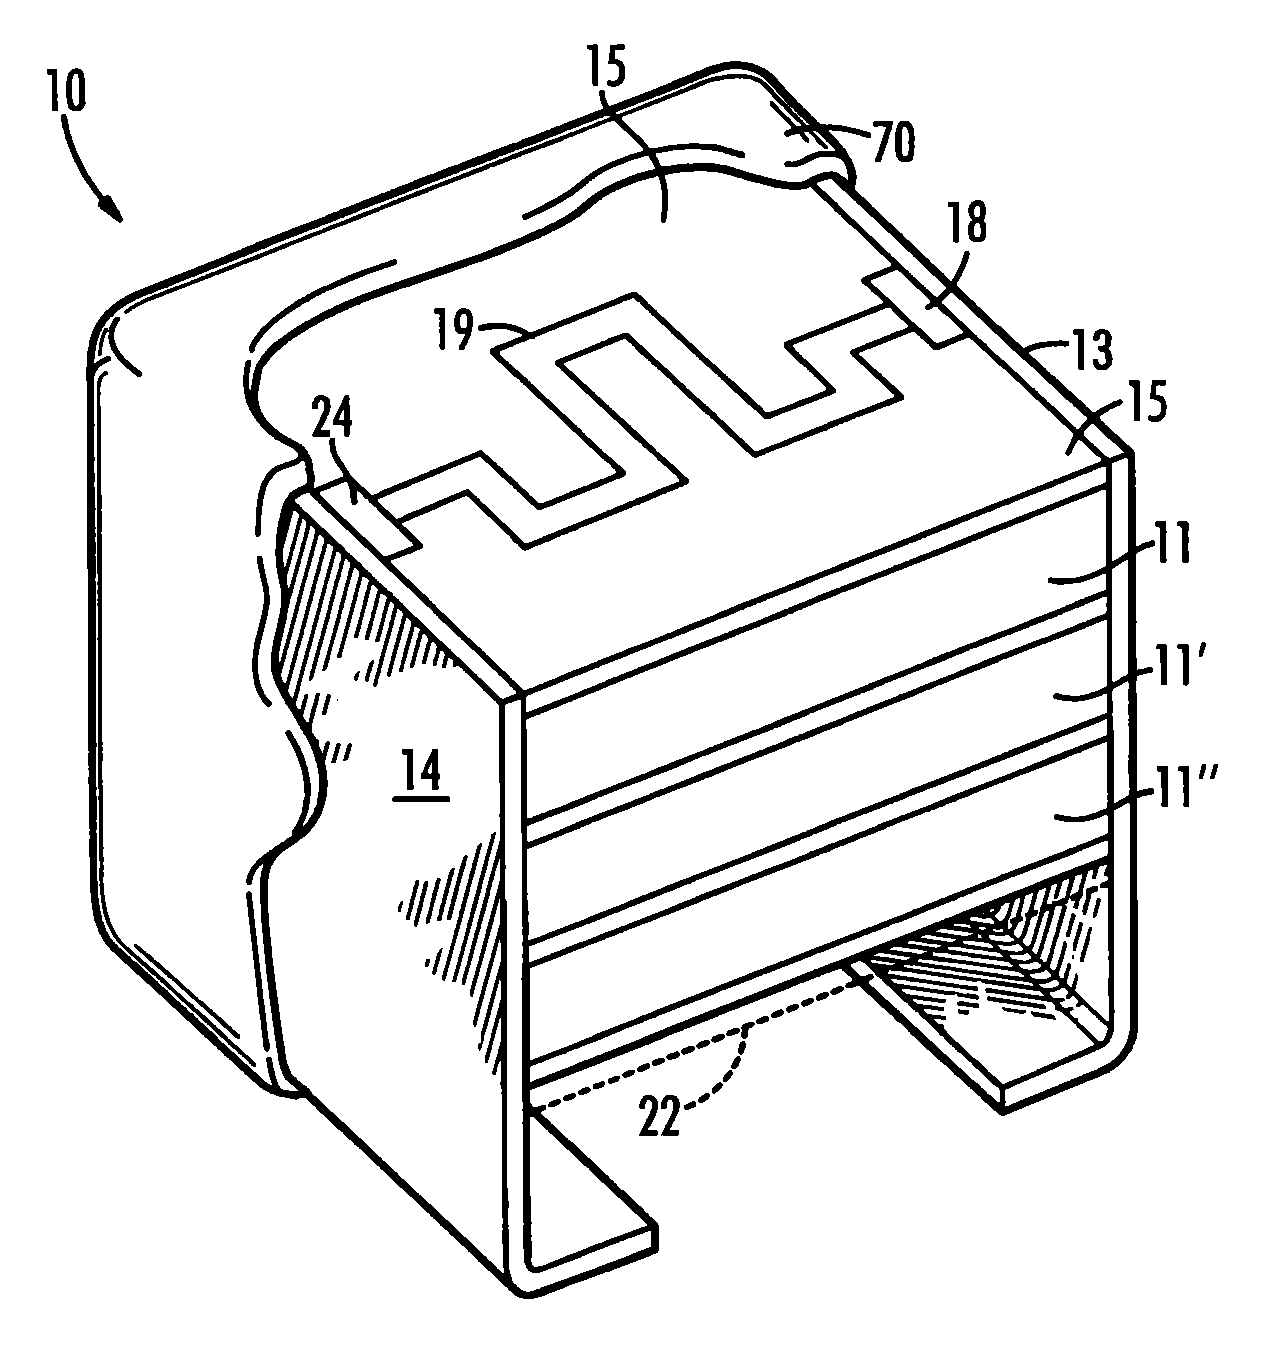 Externally fused and resistively loaded safety capacitor